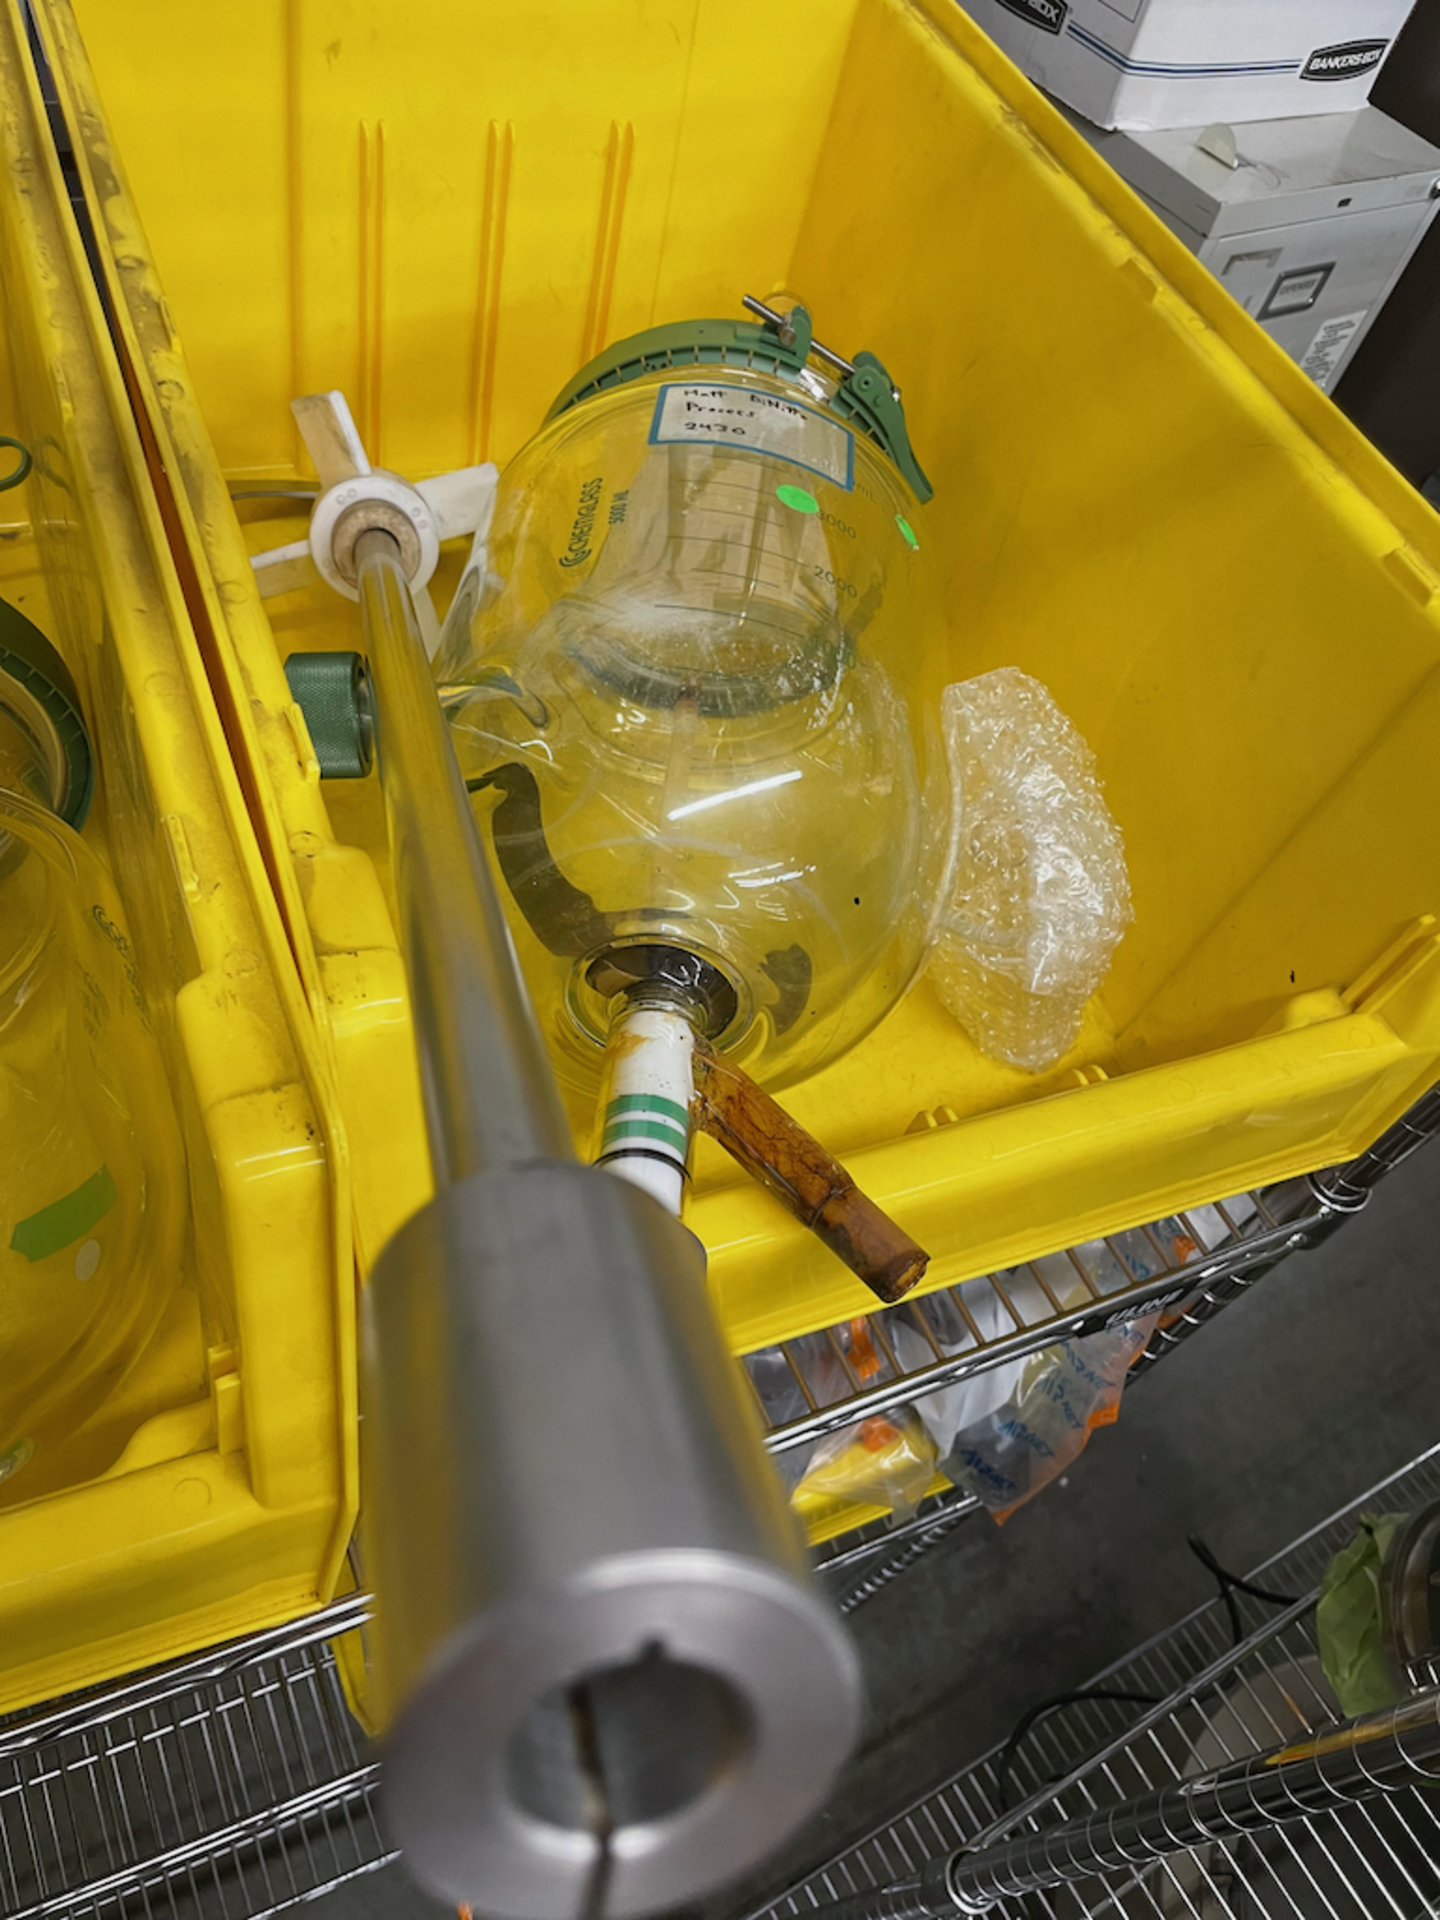 CHEMGLASS LOT CONSISTING OF THE CONTENTS OF QTY-4 YELLOW TOTE BINS CONTAINING VARIOUS CHEMGLASS - Image 6 of 9